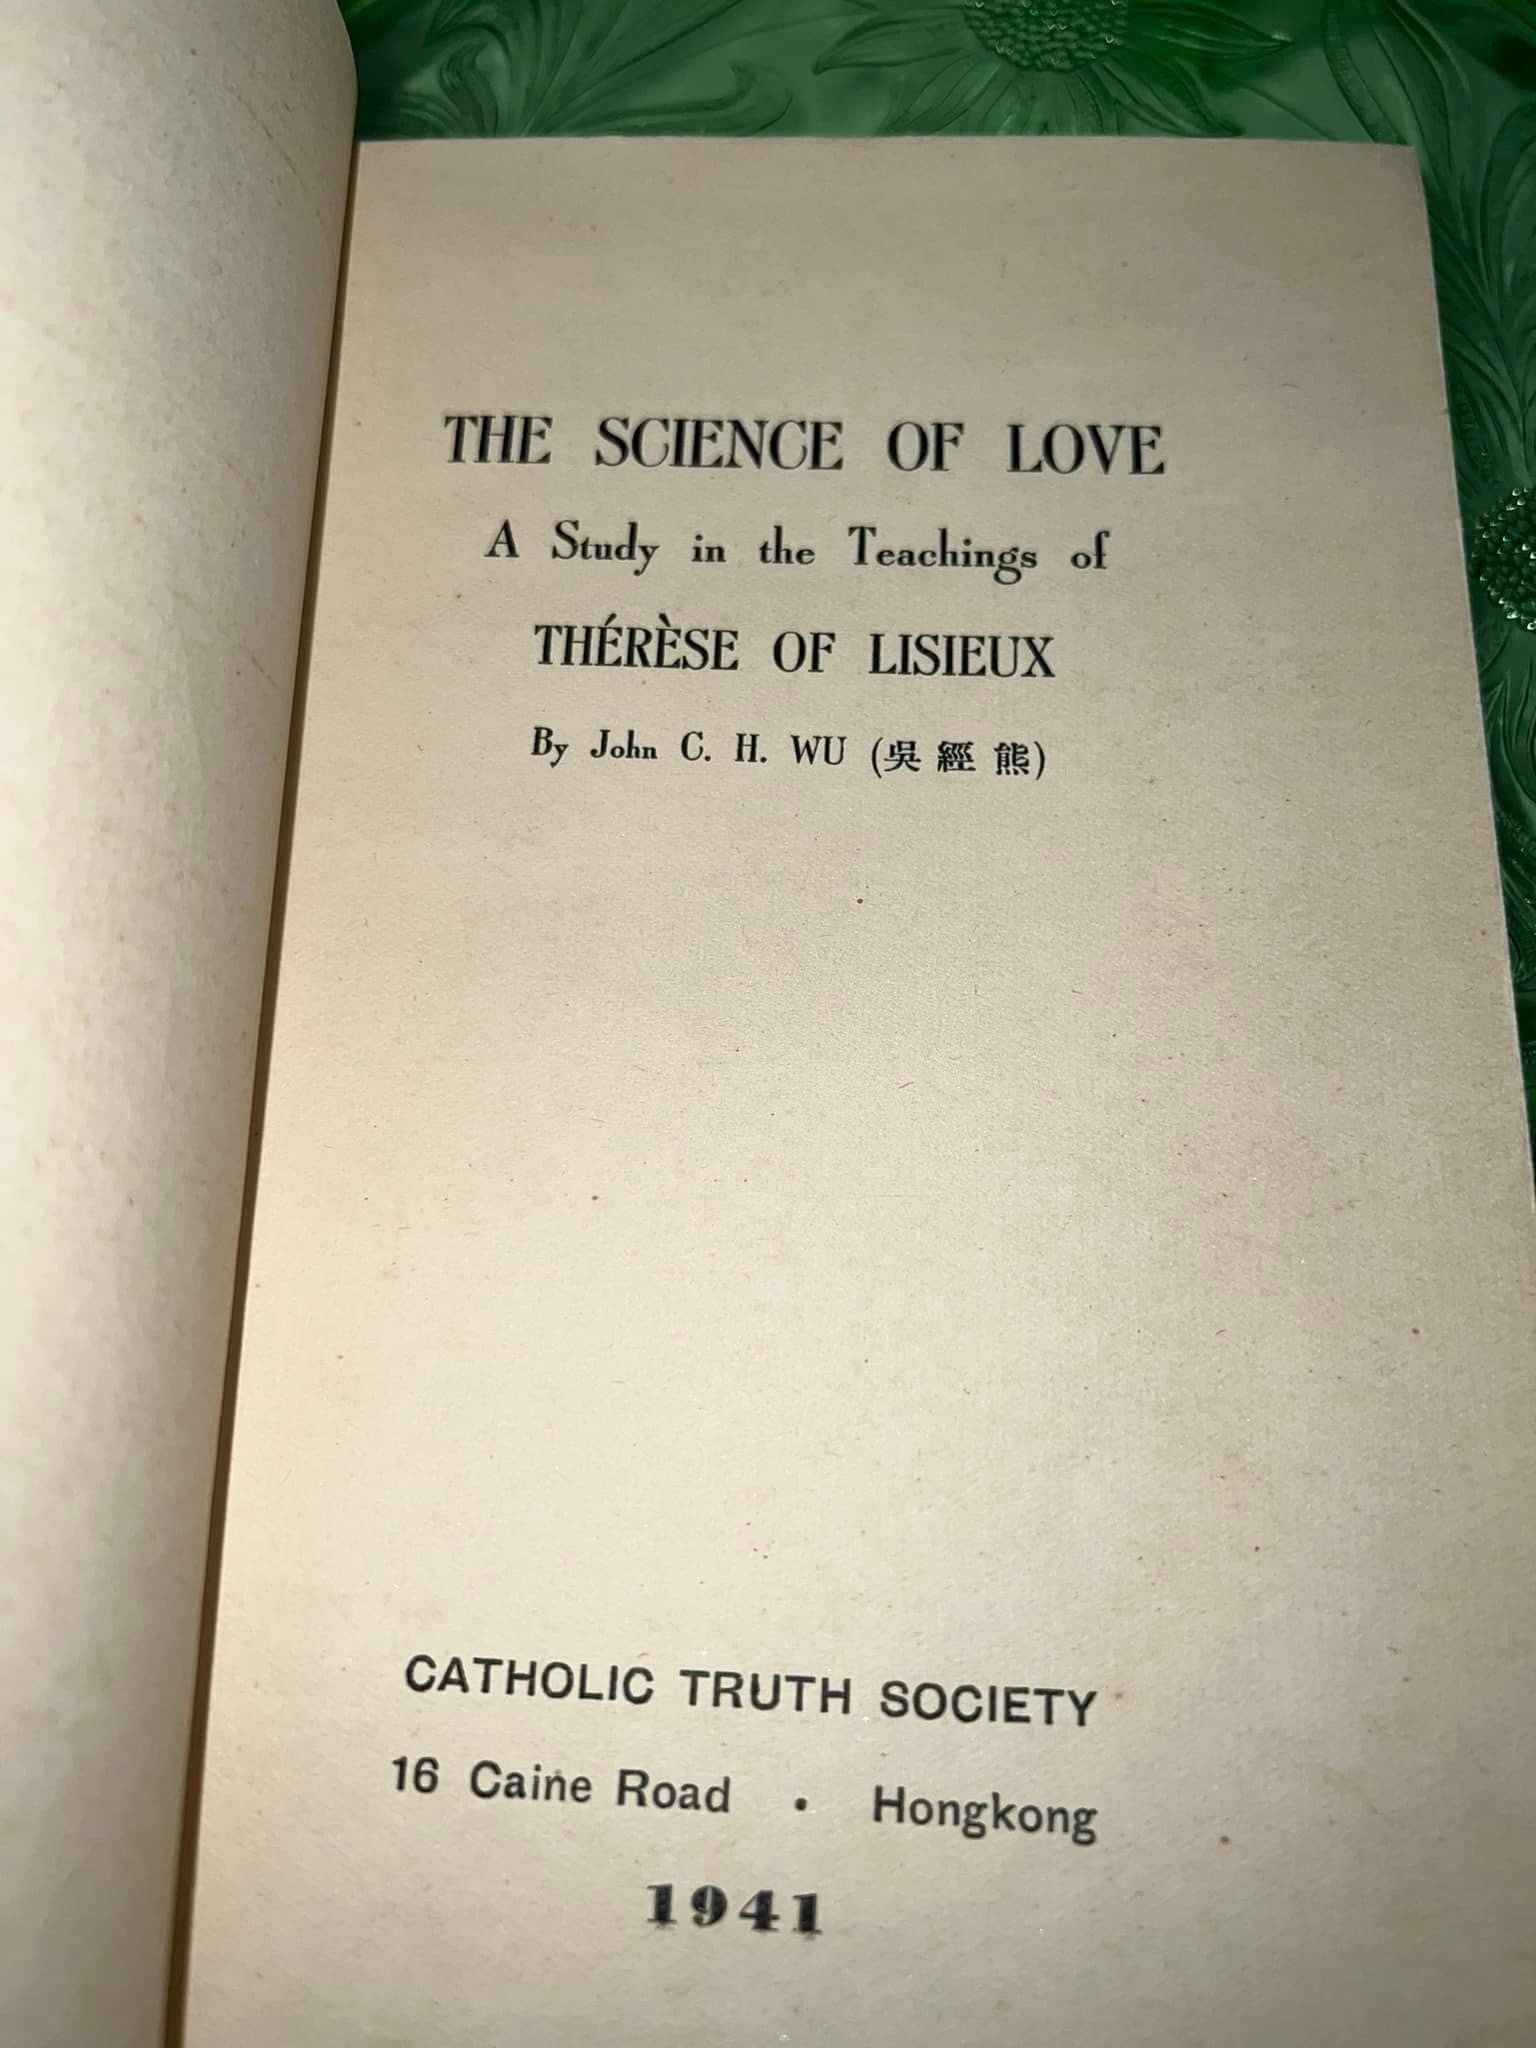 Vintage The science of love a study in the teachings of Therese of lisieux Hong Kong 1942 1st edition